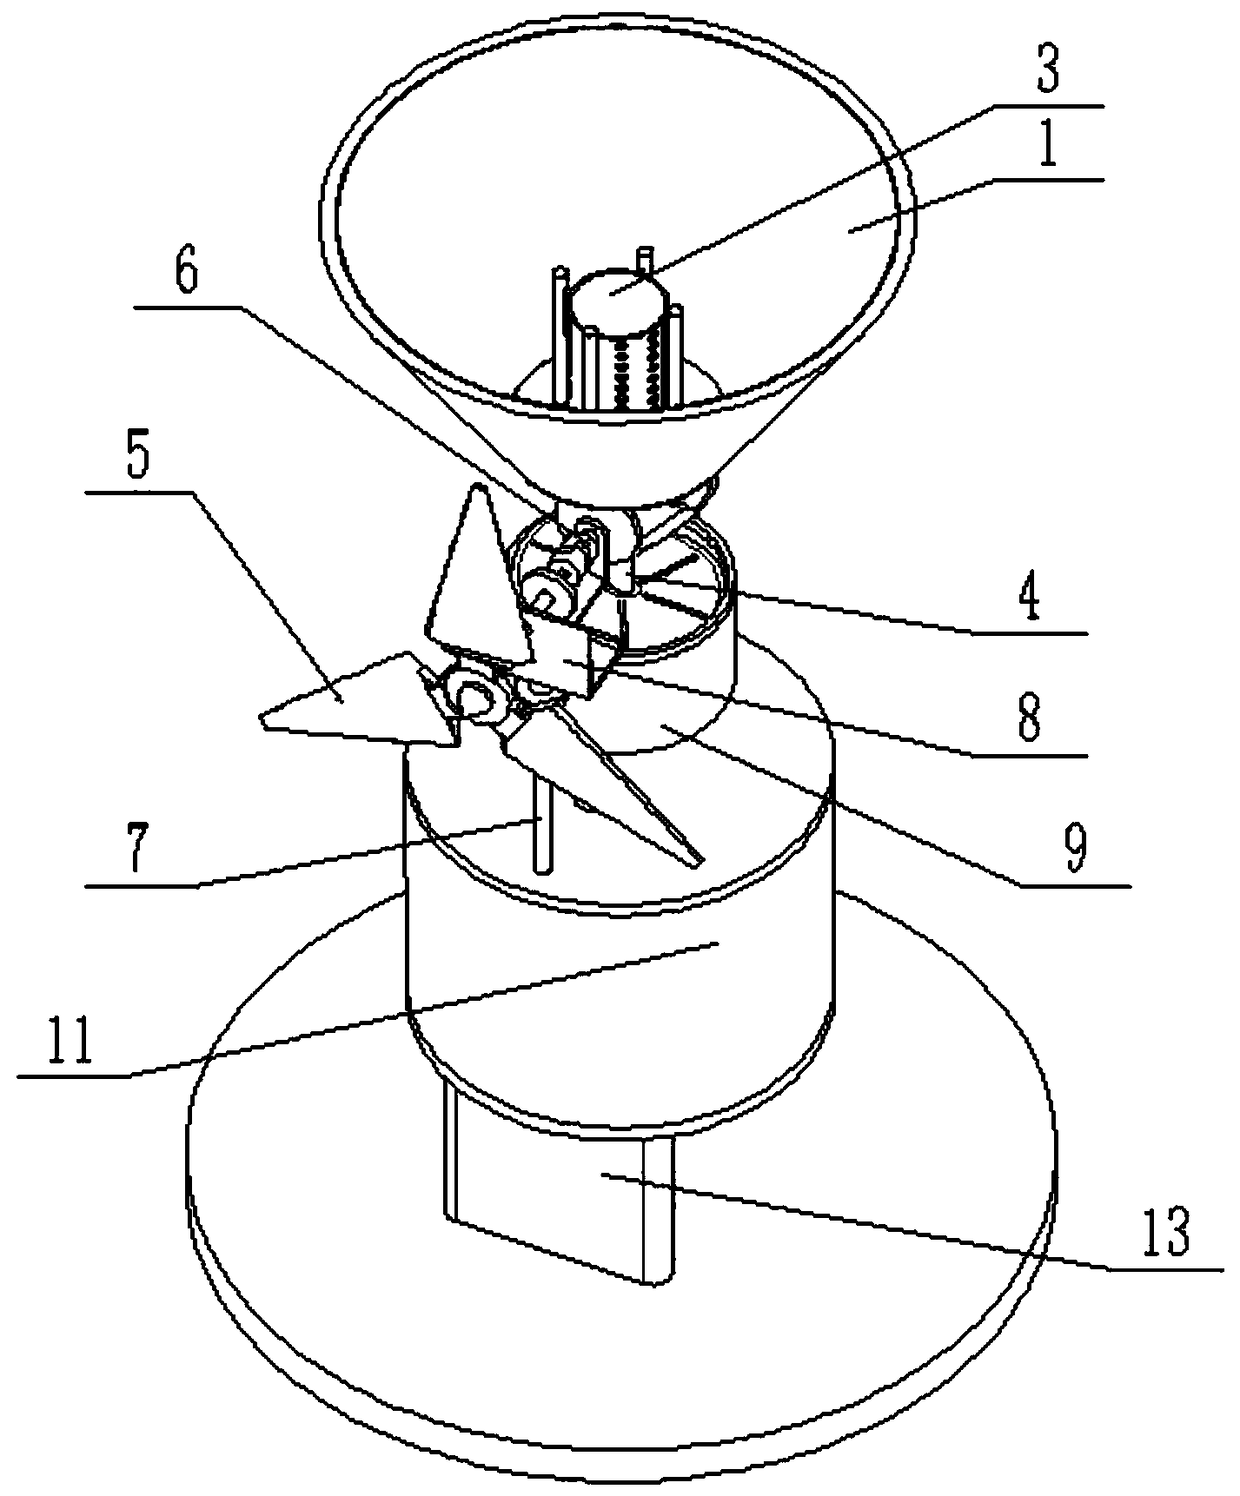 Rainwater filtering, purifying and utilizing device